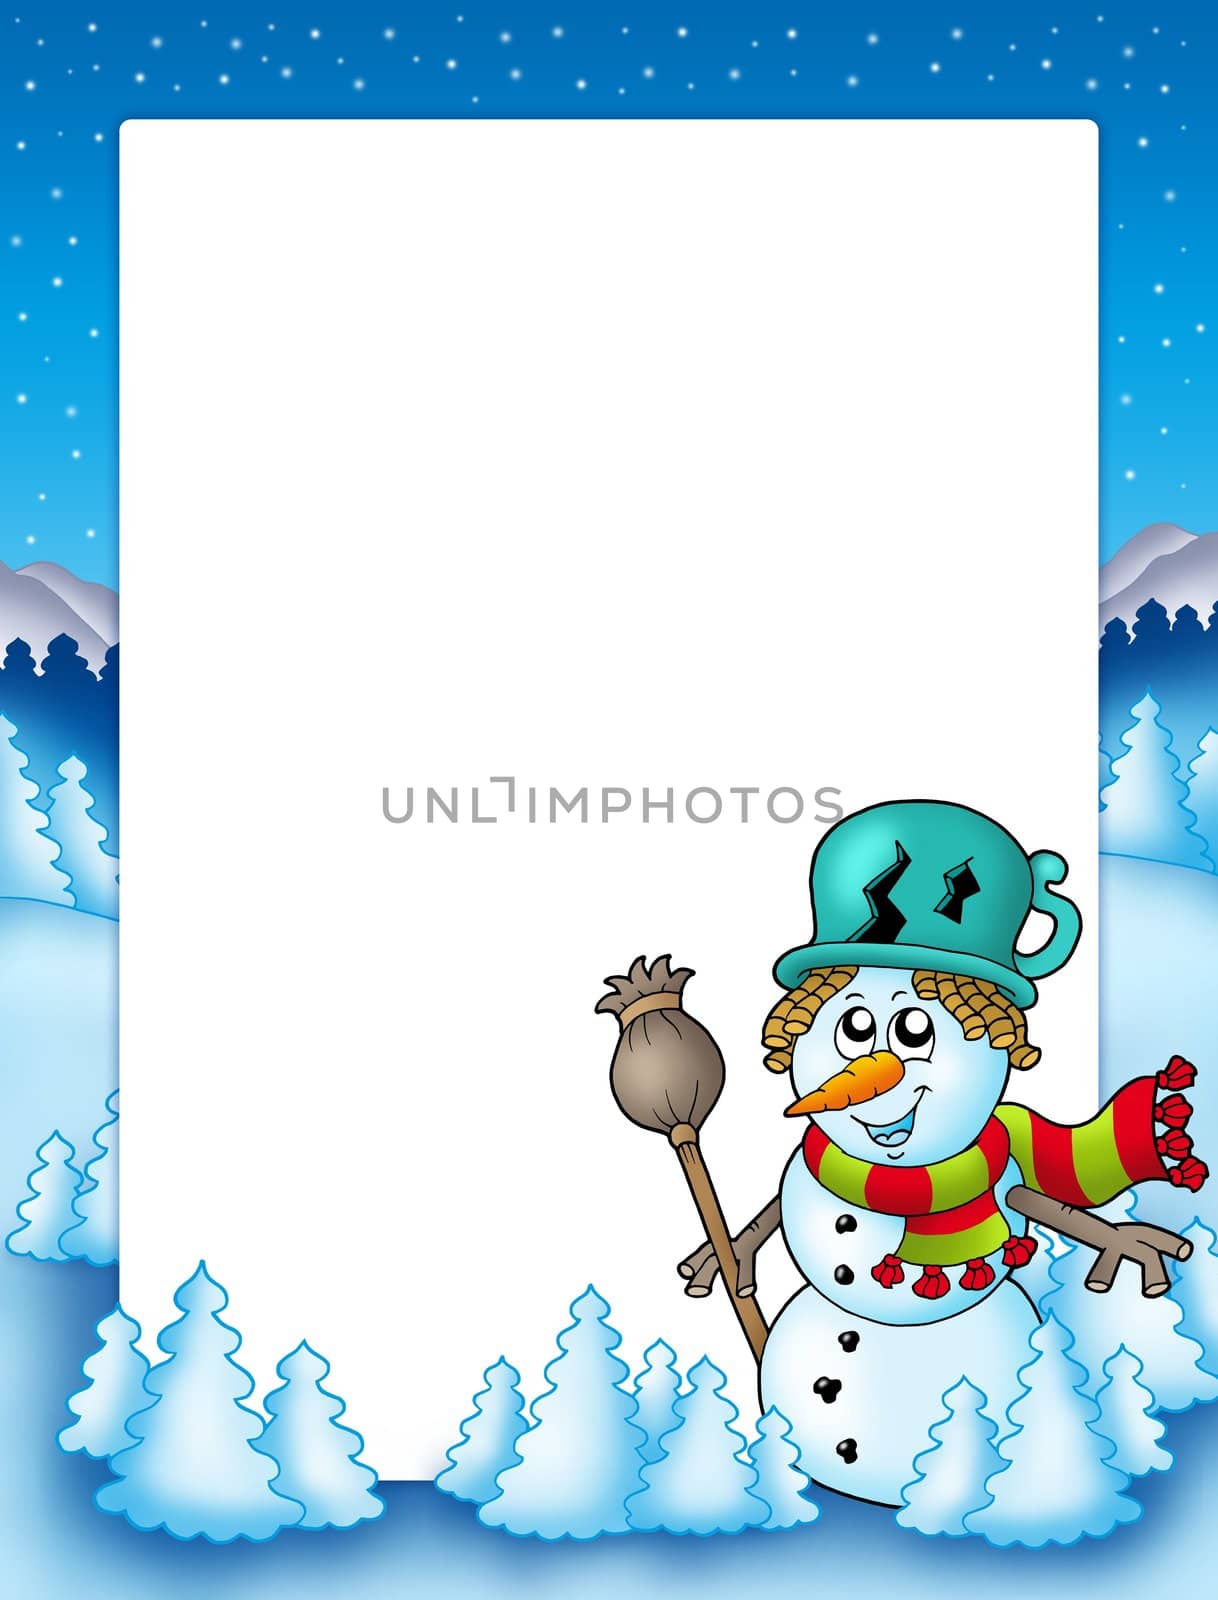 Frame with snowman and trees - color illustration.